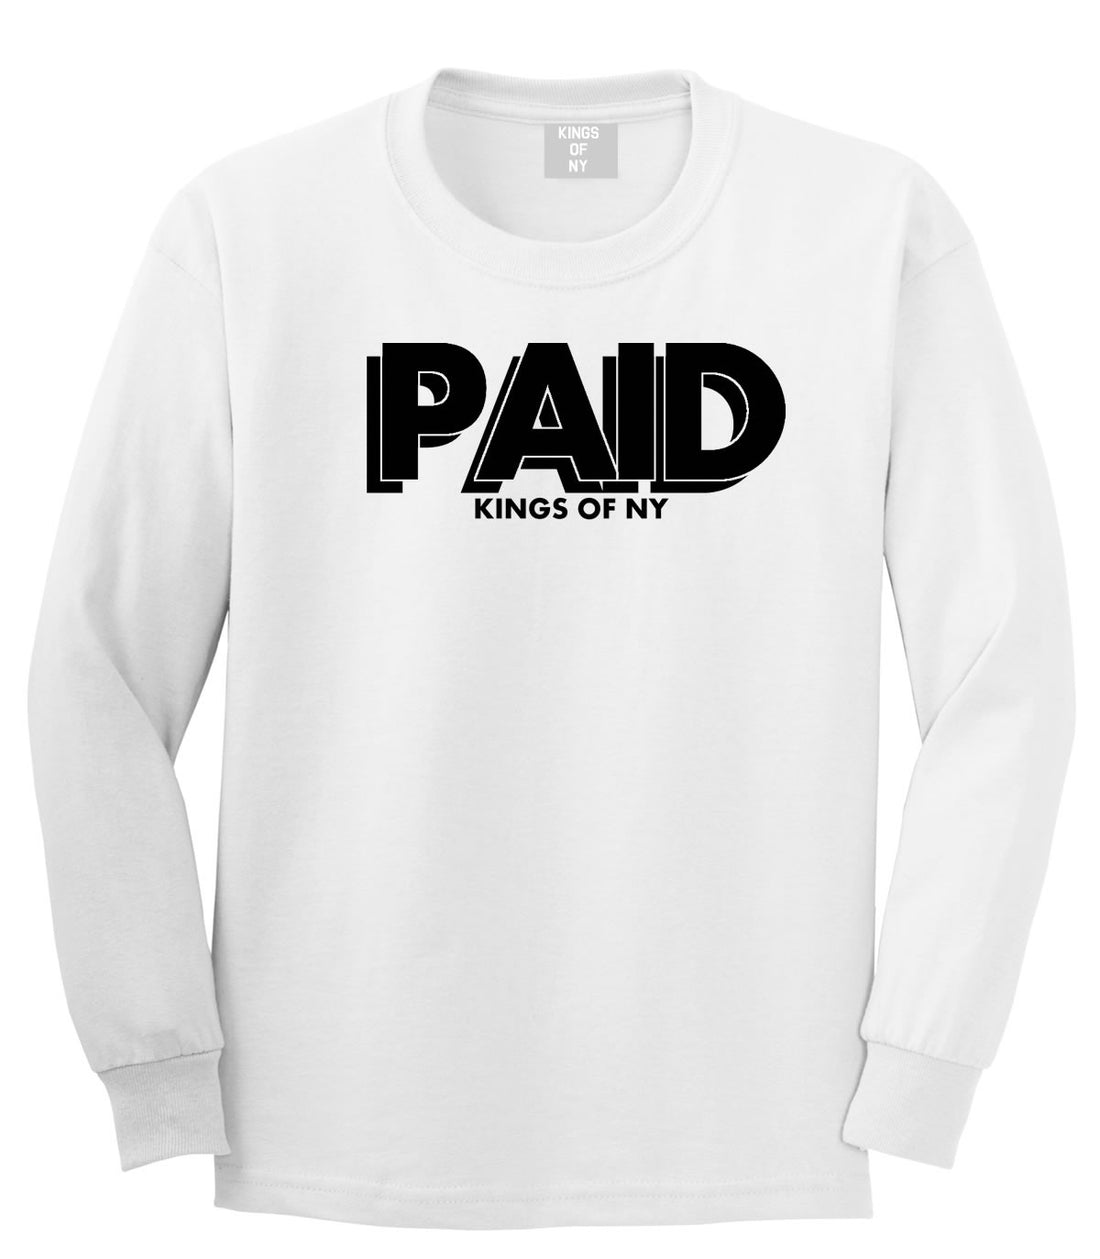 PAID Kings Of NY W15 Long Sleeve T-Shirt in White By Kings Of NY